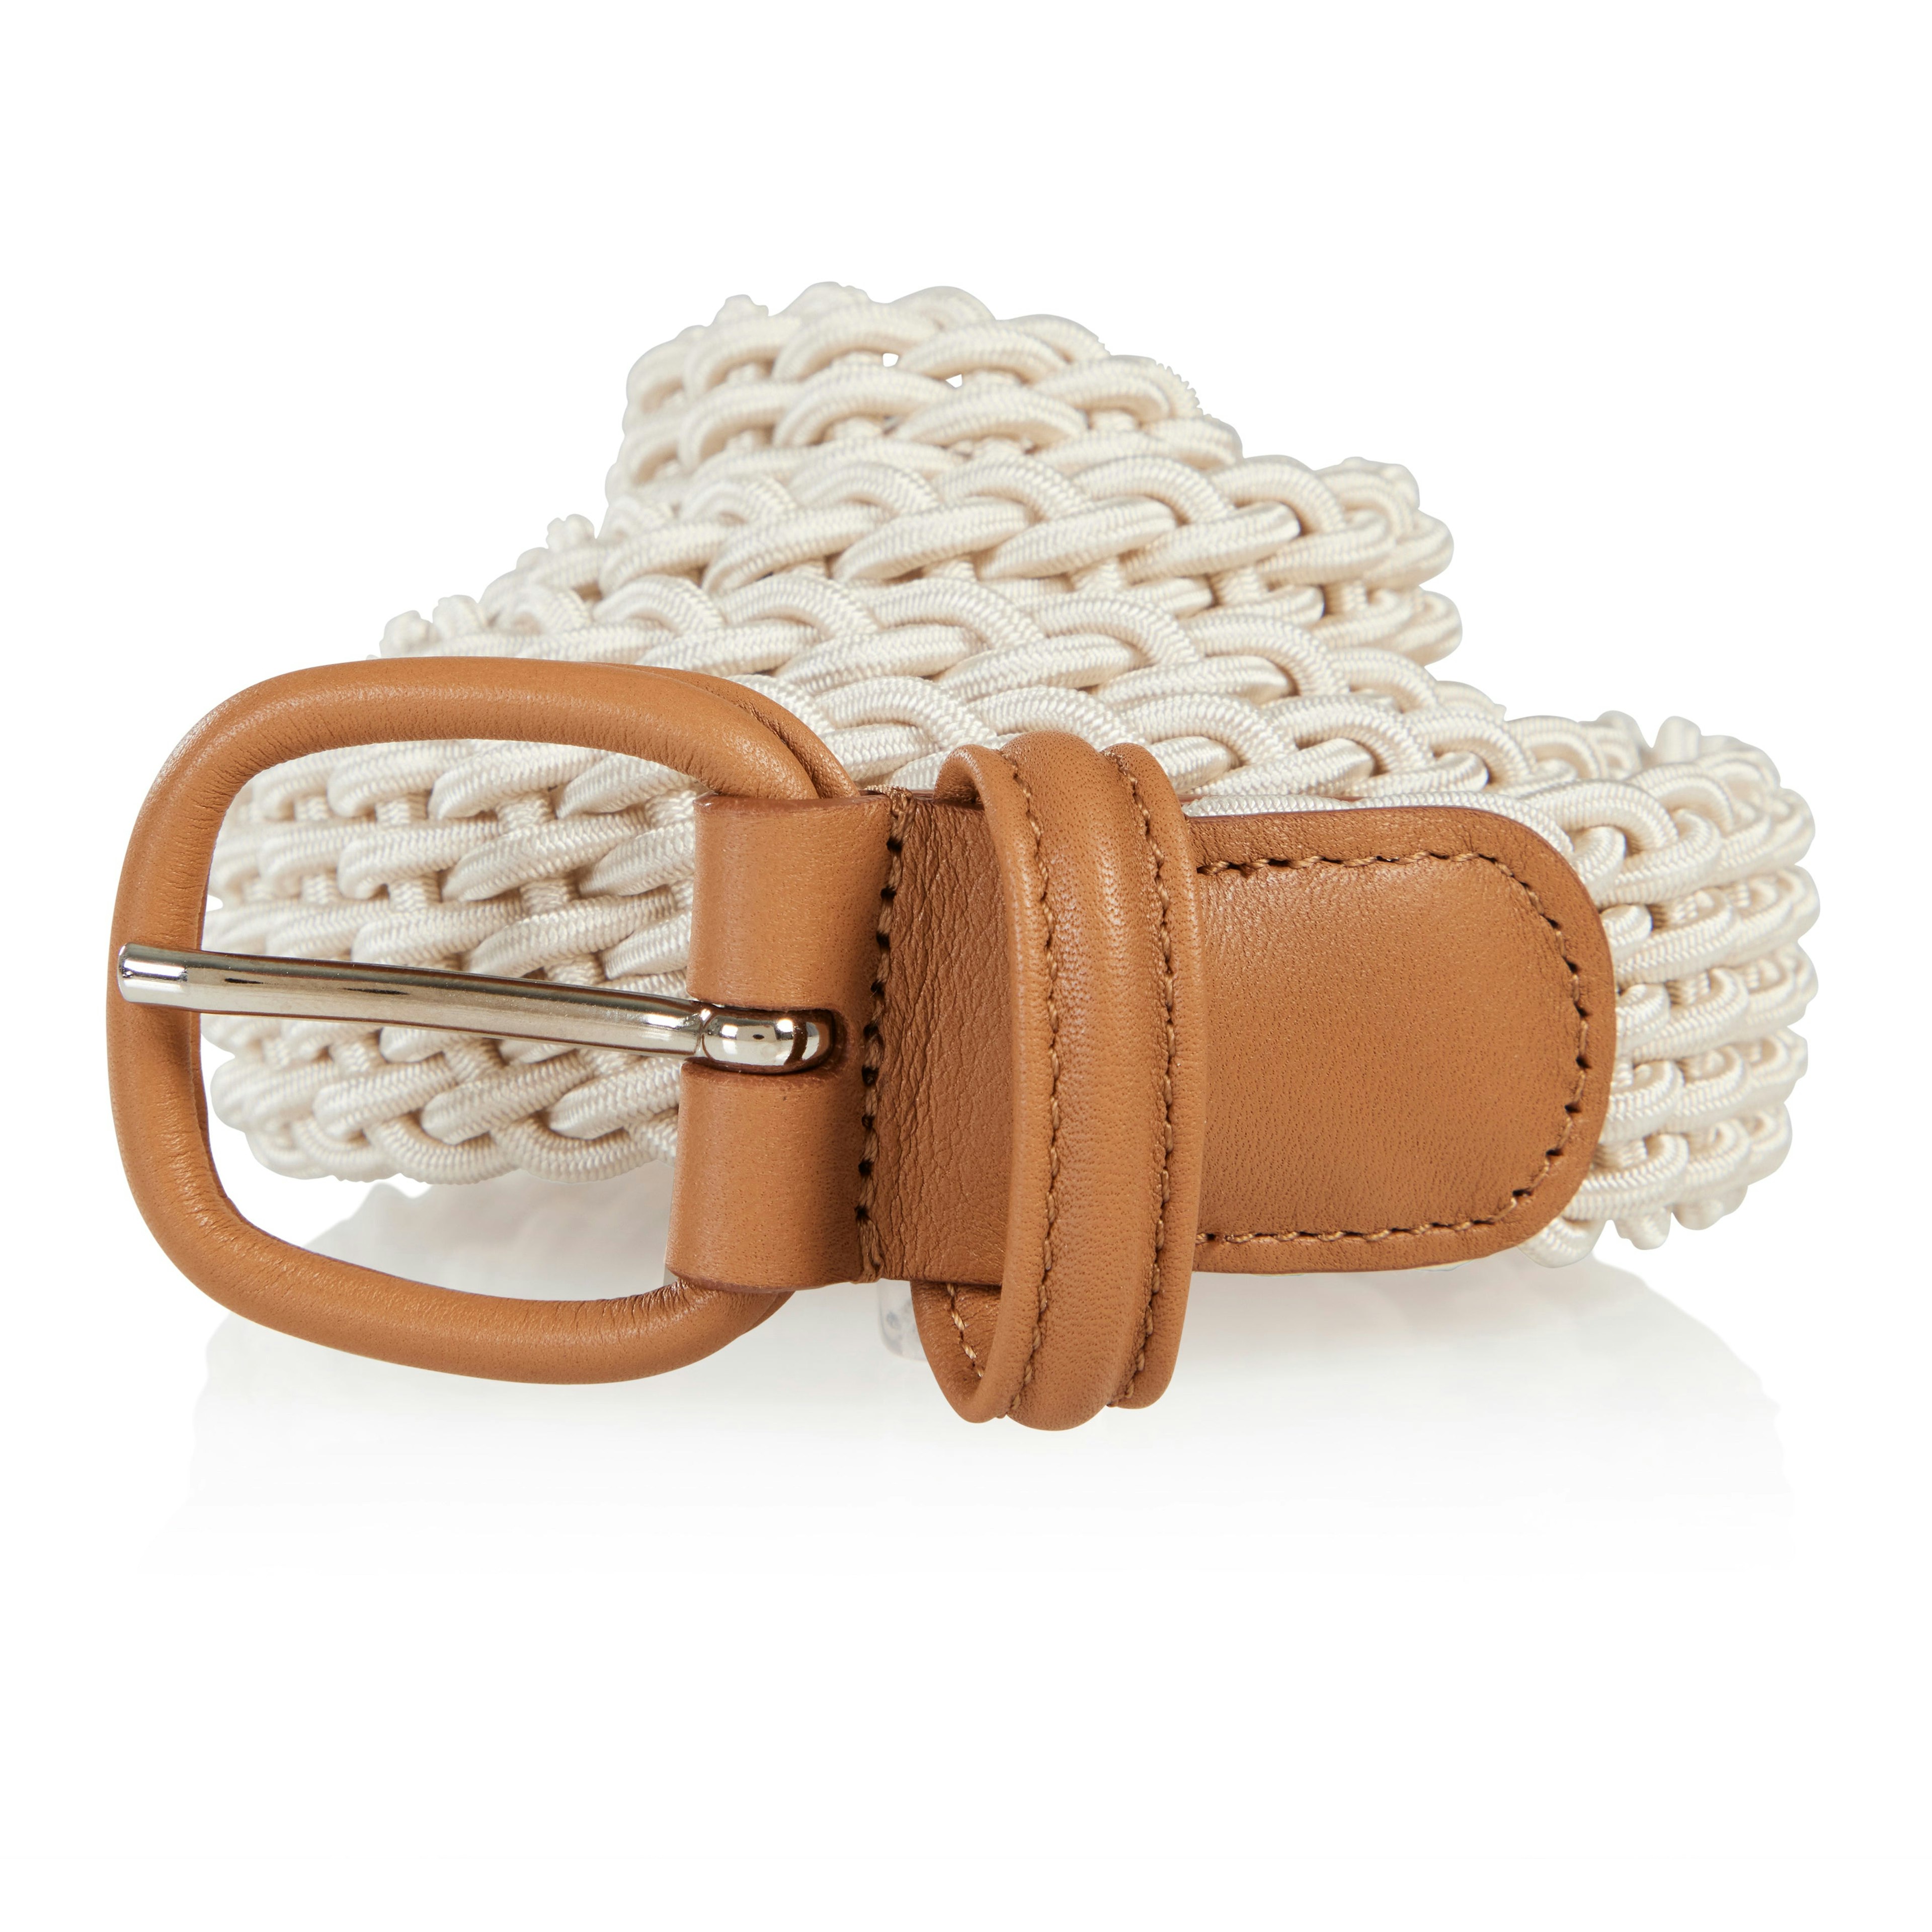 Woven O-Ring Belt - The Armoury